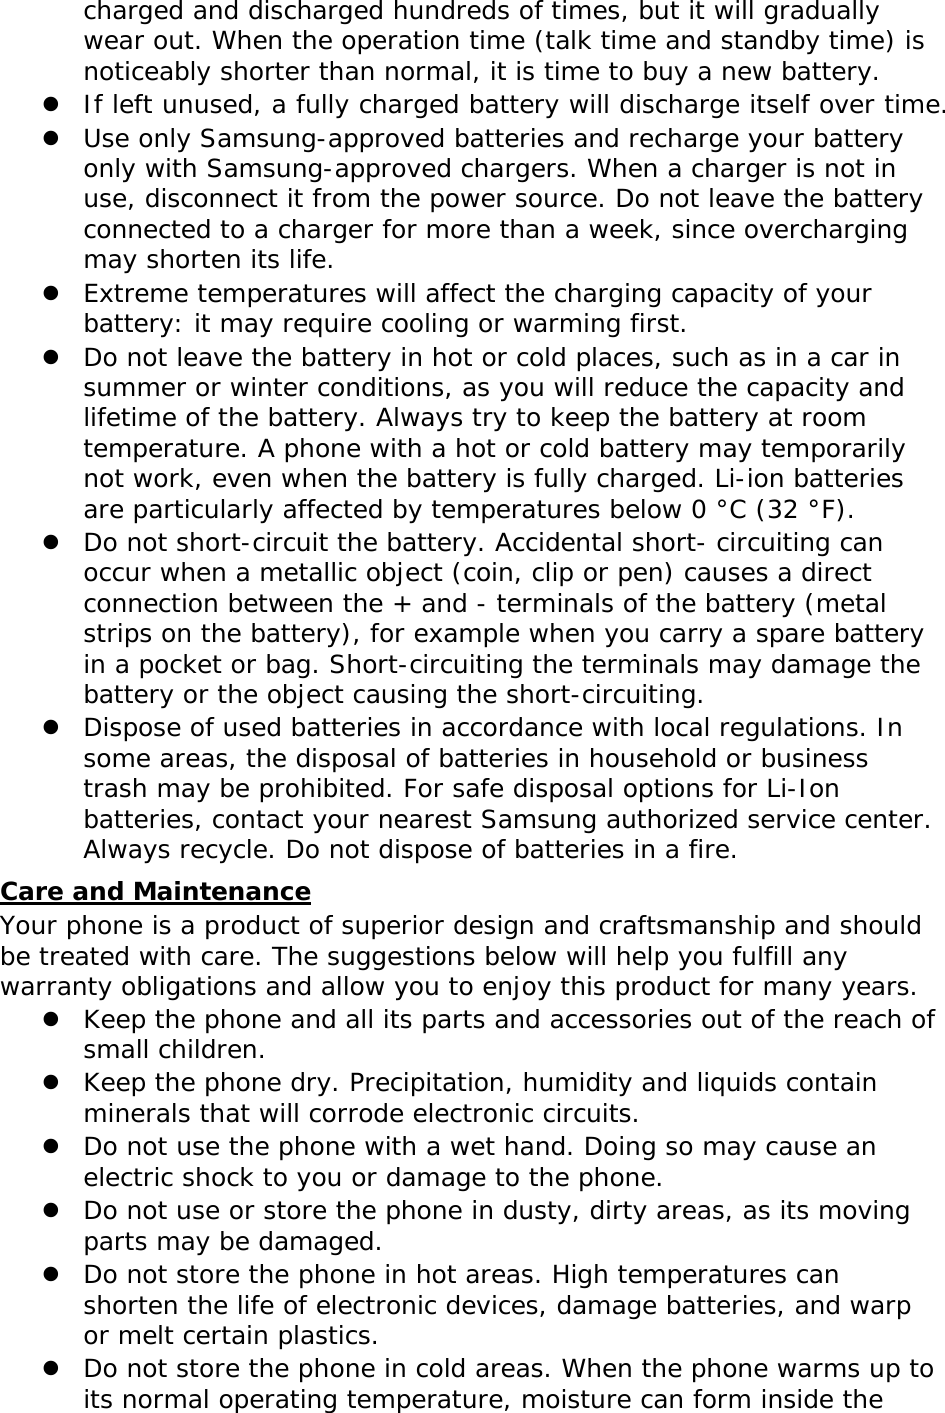 charged and discharged hundreds of times, but it will gradually wear out. When the operation time (talk time and standby time) is noticeably shorter than normal, it is time to buy a new battery. z If left unused, a fully charged battery will discharge itself over time. z Use only Samsung-approved batteries and recharge your battery only with Samsung-approved chargers. When a charger is not in use, disconnect it from the power source. Do not leave the battery connected to a charger for more than a week, since overcharging may shorten its life. z Extreme temperatures will affect the charging capacity of your battery: it may require cooling or warming first. z Do not leave the battery in hot or cold places, such as in a car in summer or winter conditions, as you will reduce the capacity and lifetime of the battery. Always try to keep the battery at room temperature. A phone with a hot or cold battery may temporarily not work, even when the battery is fully charged. Li-ion batteries are particularly affected by temperatures below 0 °C (32 °F). z Do not short-circuit the battery. Accidental short- circuiting can occur when a metallic object (coin, clip or pen) causes a direct connection between the + and - terminals of the battery (metal strips on the battery), for example when you carry a spare battery in a pocket or bag. Short-circuiting the terminals may damage the battery or the object causing the short-circuiting. z Dispose of used batteries in accordance with local regulations. In some areas, the disposal of batteries in household or business trash may be prohibited. For safe disposal options for Li-Ion batteries, contact your nearest Samsung authorized service center. Always recycle. Do not dispose of batteries in a fire. UCare and Maintenance Your phone is a product of superior design and craftsmanship and should be treated with care. The suggestions below will help you fulfill any warranty obligations and allow you to enjoy this product for many years. z Keep the phone and all its parts and accessories out of the reach of small children. z Keep the phone dry. Precipitation, humidity and liquids contain minerals that will corrode electronic circuits. z Do not use the phone with a wet hand. Doing so may cause an electric shock to you or damage to the phone. z Do not use or store the phone in dusty, dirty areas, as its moving parts may be damaged. z Do not store the phone in hot areas. High temperatures can shorten the life of electronic devices, damage batteries, and warp or melt certain plastics. z Do not store the phone in cold areas. When the phone warms up to its normal operating temperature, moisture can form inside the 